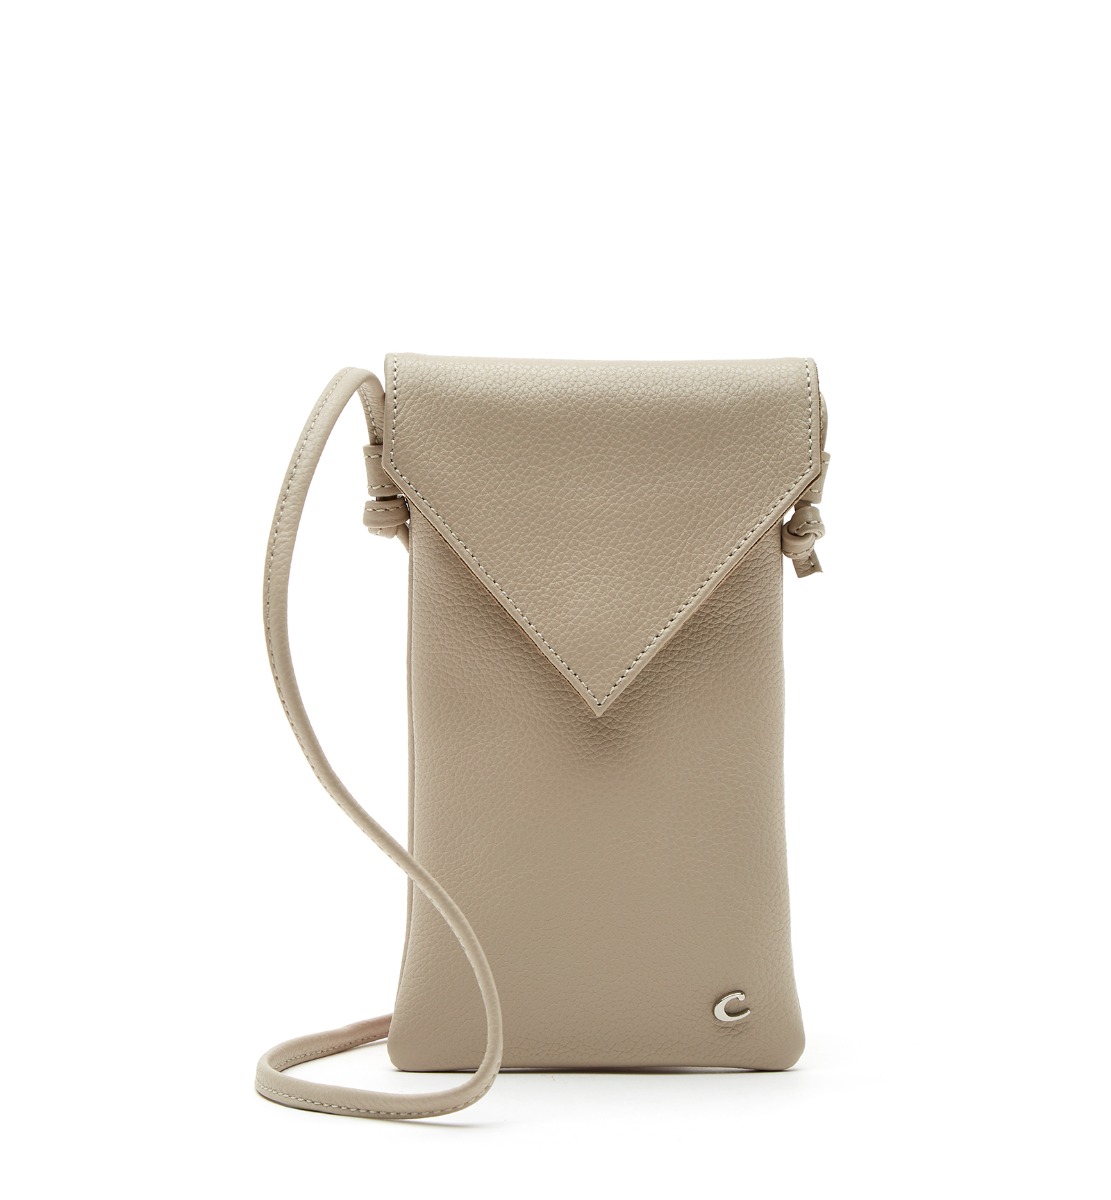 La Canadienne Marry Leather Phone Bag In Beige